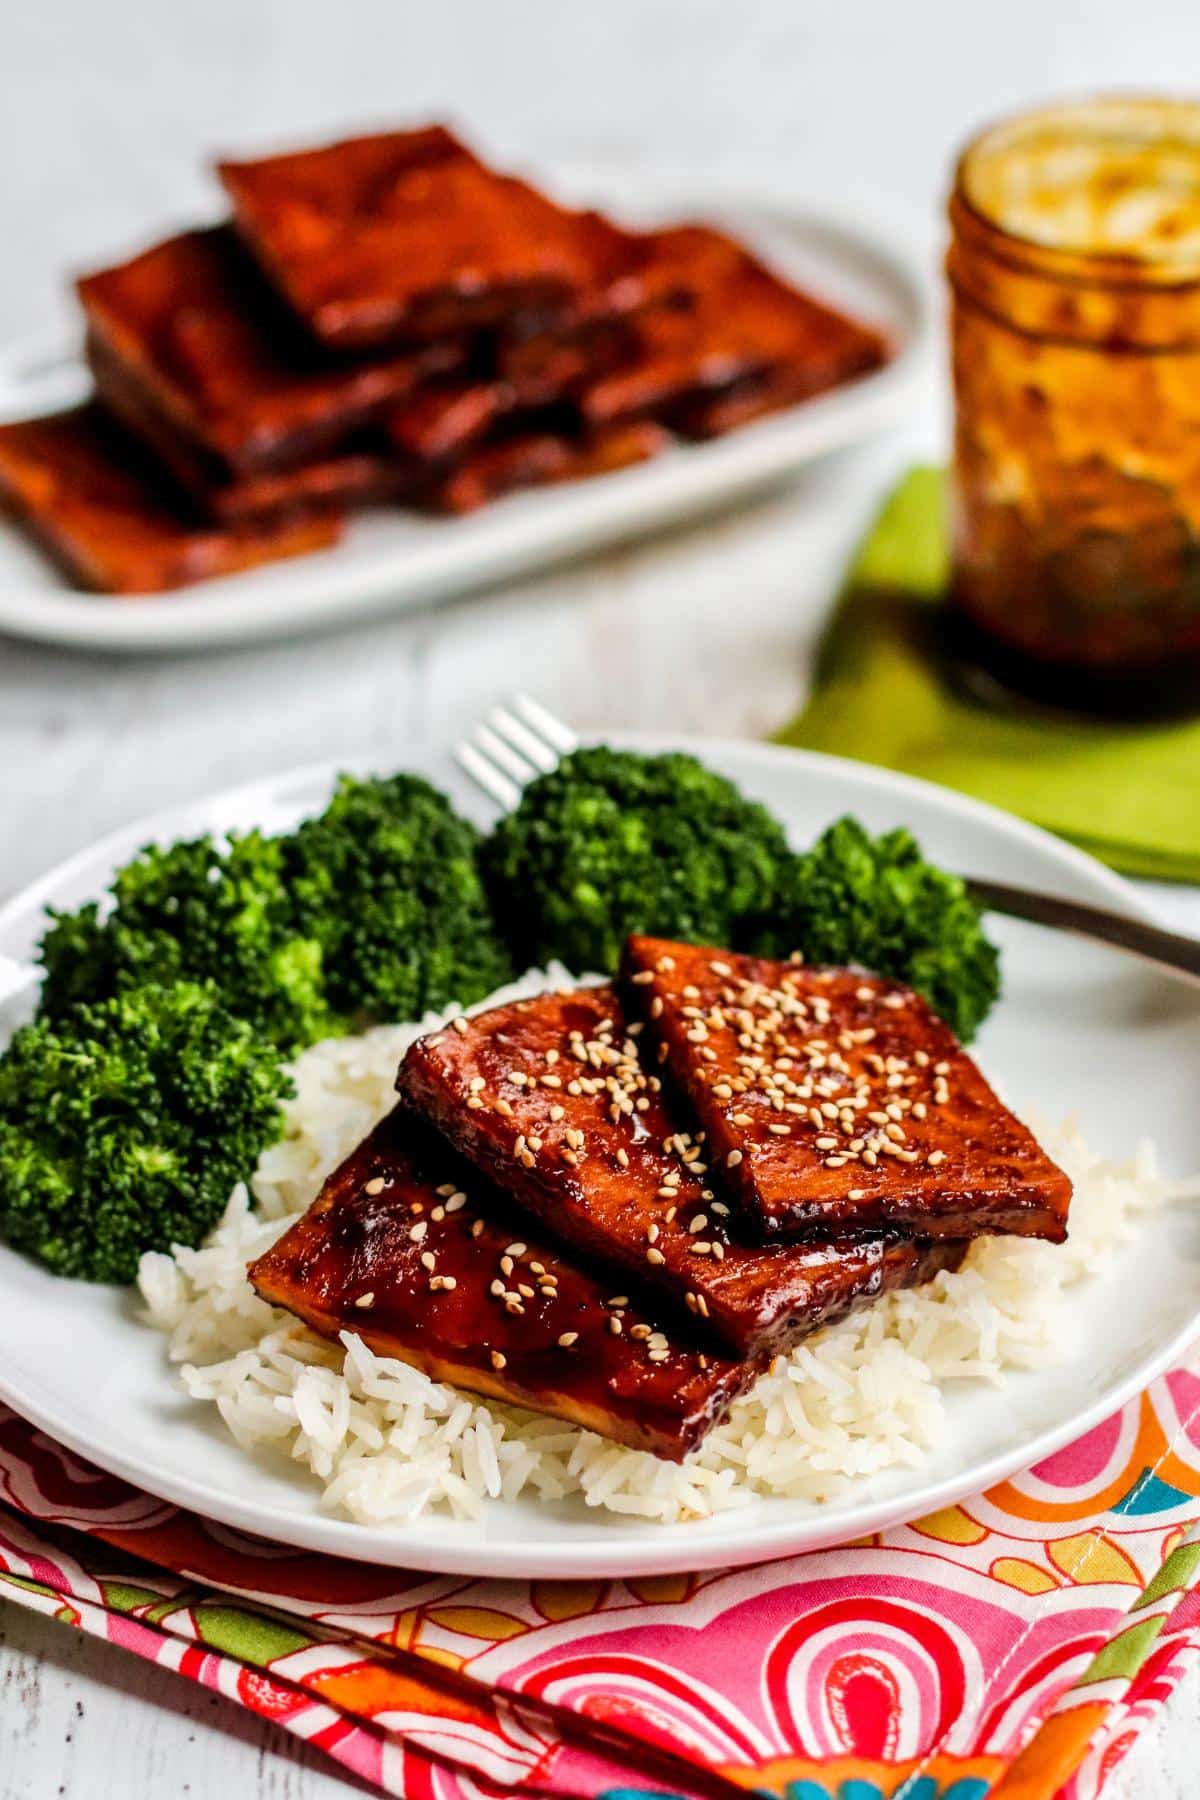 Plate with slices of tofu on rice with steamed broccoli with a platter of baked teriyaki tofu and a jar of sauce in the background.